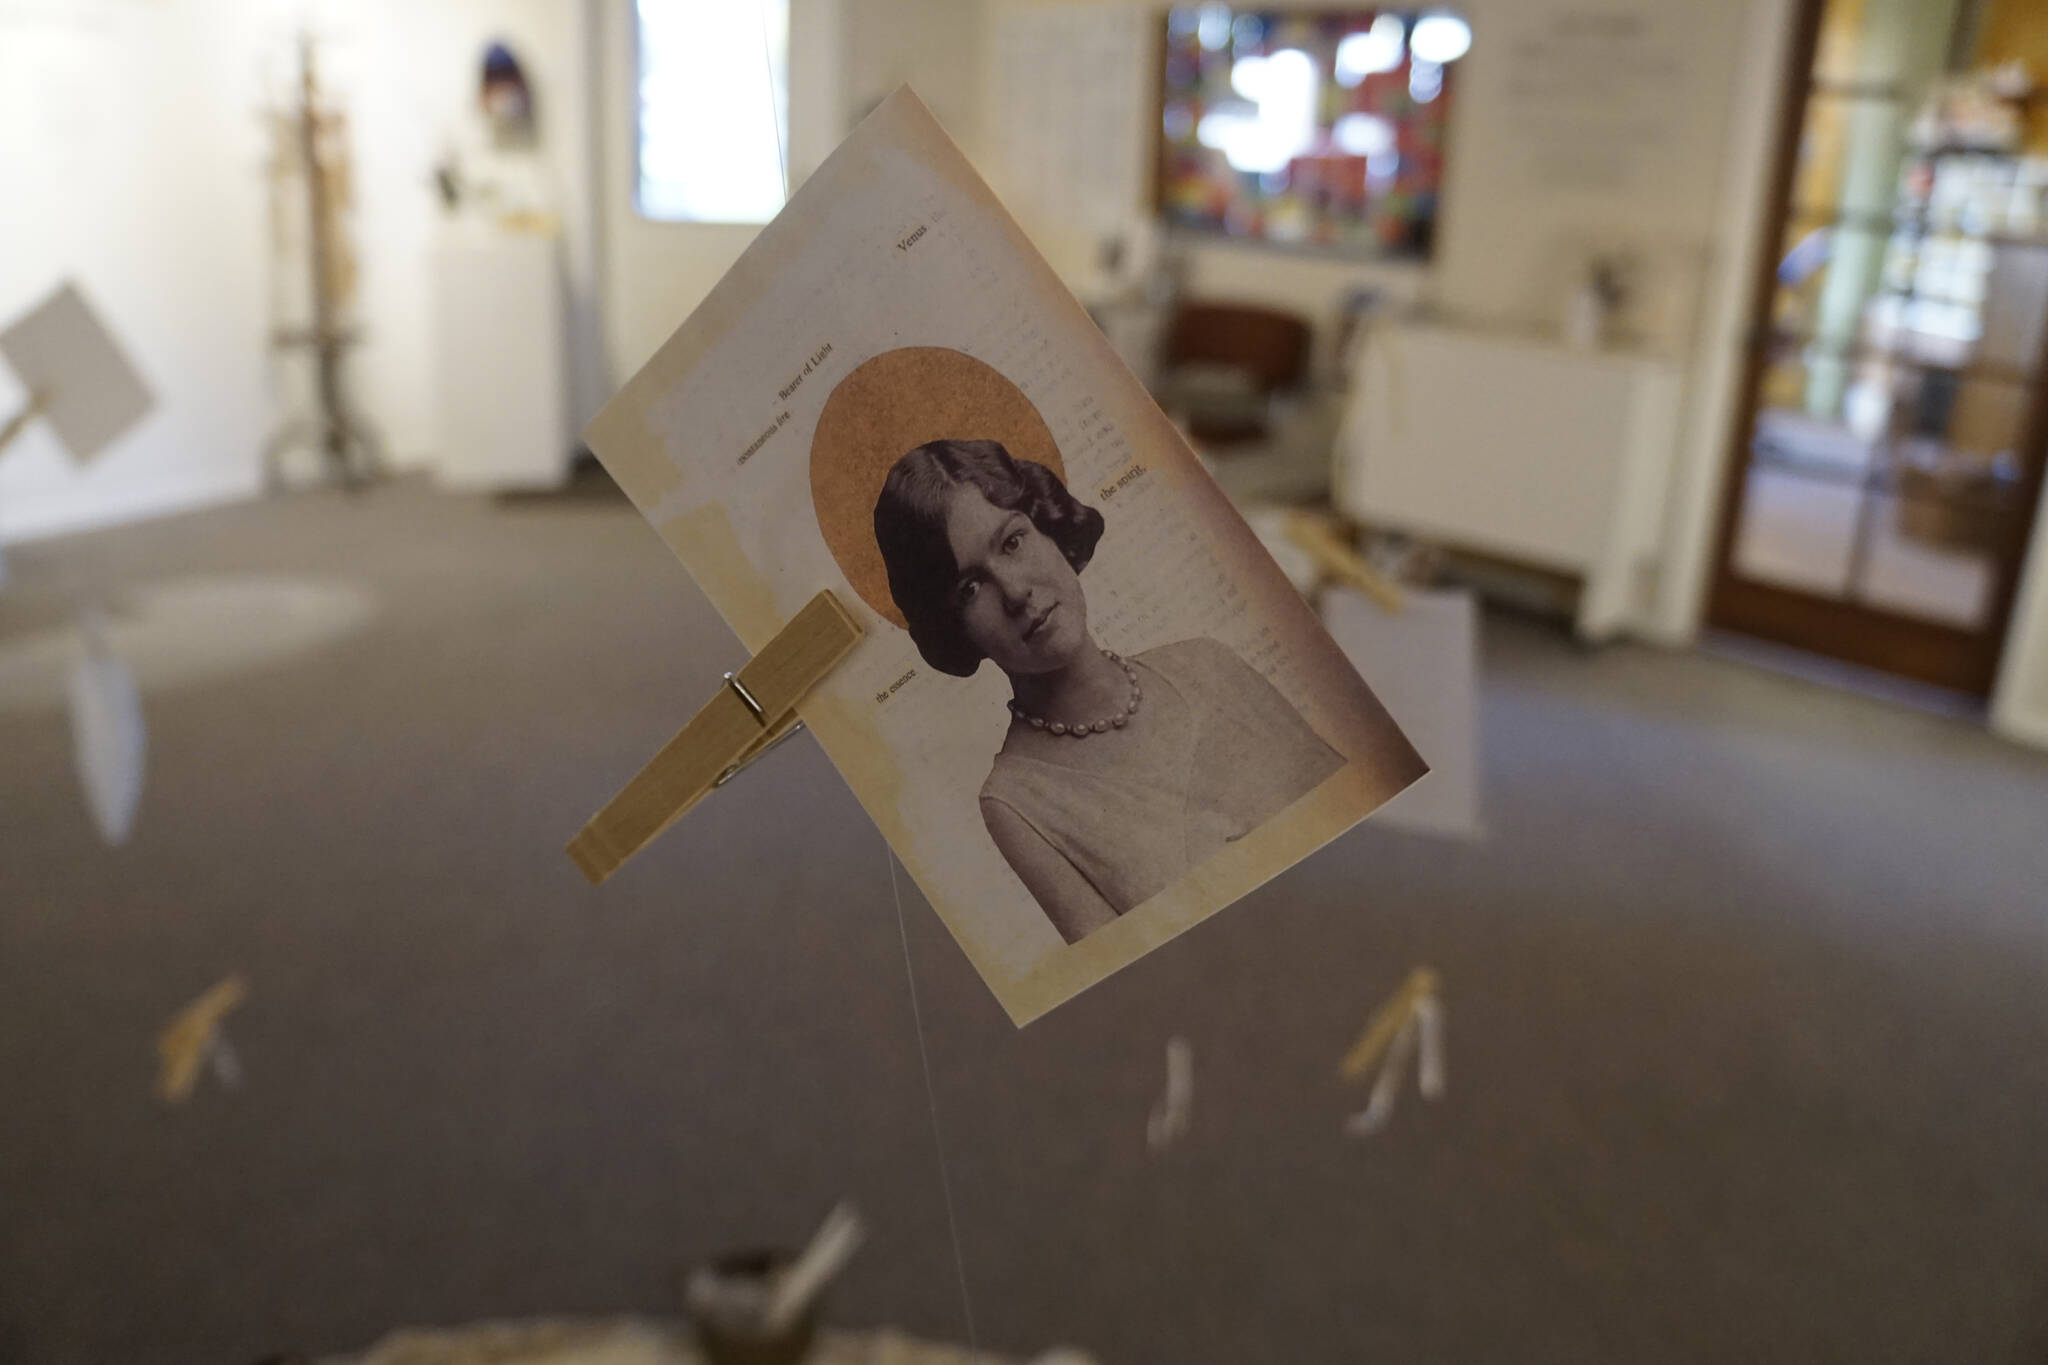 For Carly Garay’s “The Art of Ancestor Veneration,” vistors are invited to include images, letters or prayers honoring ancestors at a central dispaly. The exhibit shows through Oct. 30, 2021, at the Homer Council on the Arts in Homer, Alaska. (Photo by Michael Armstrong/Homer News)